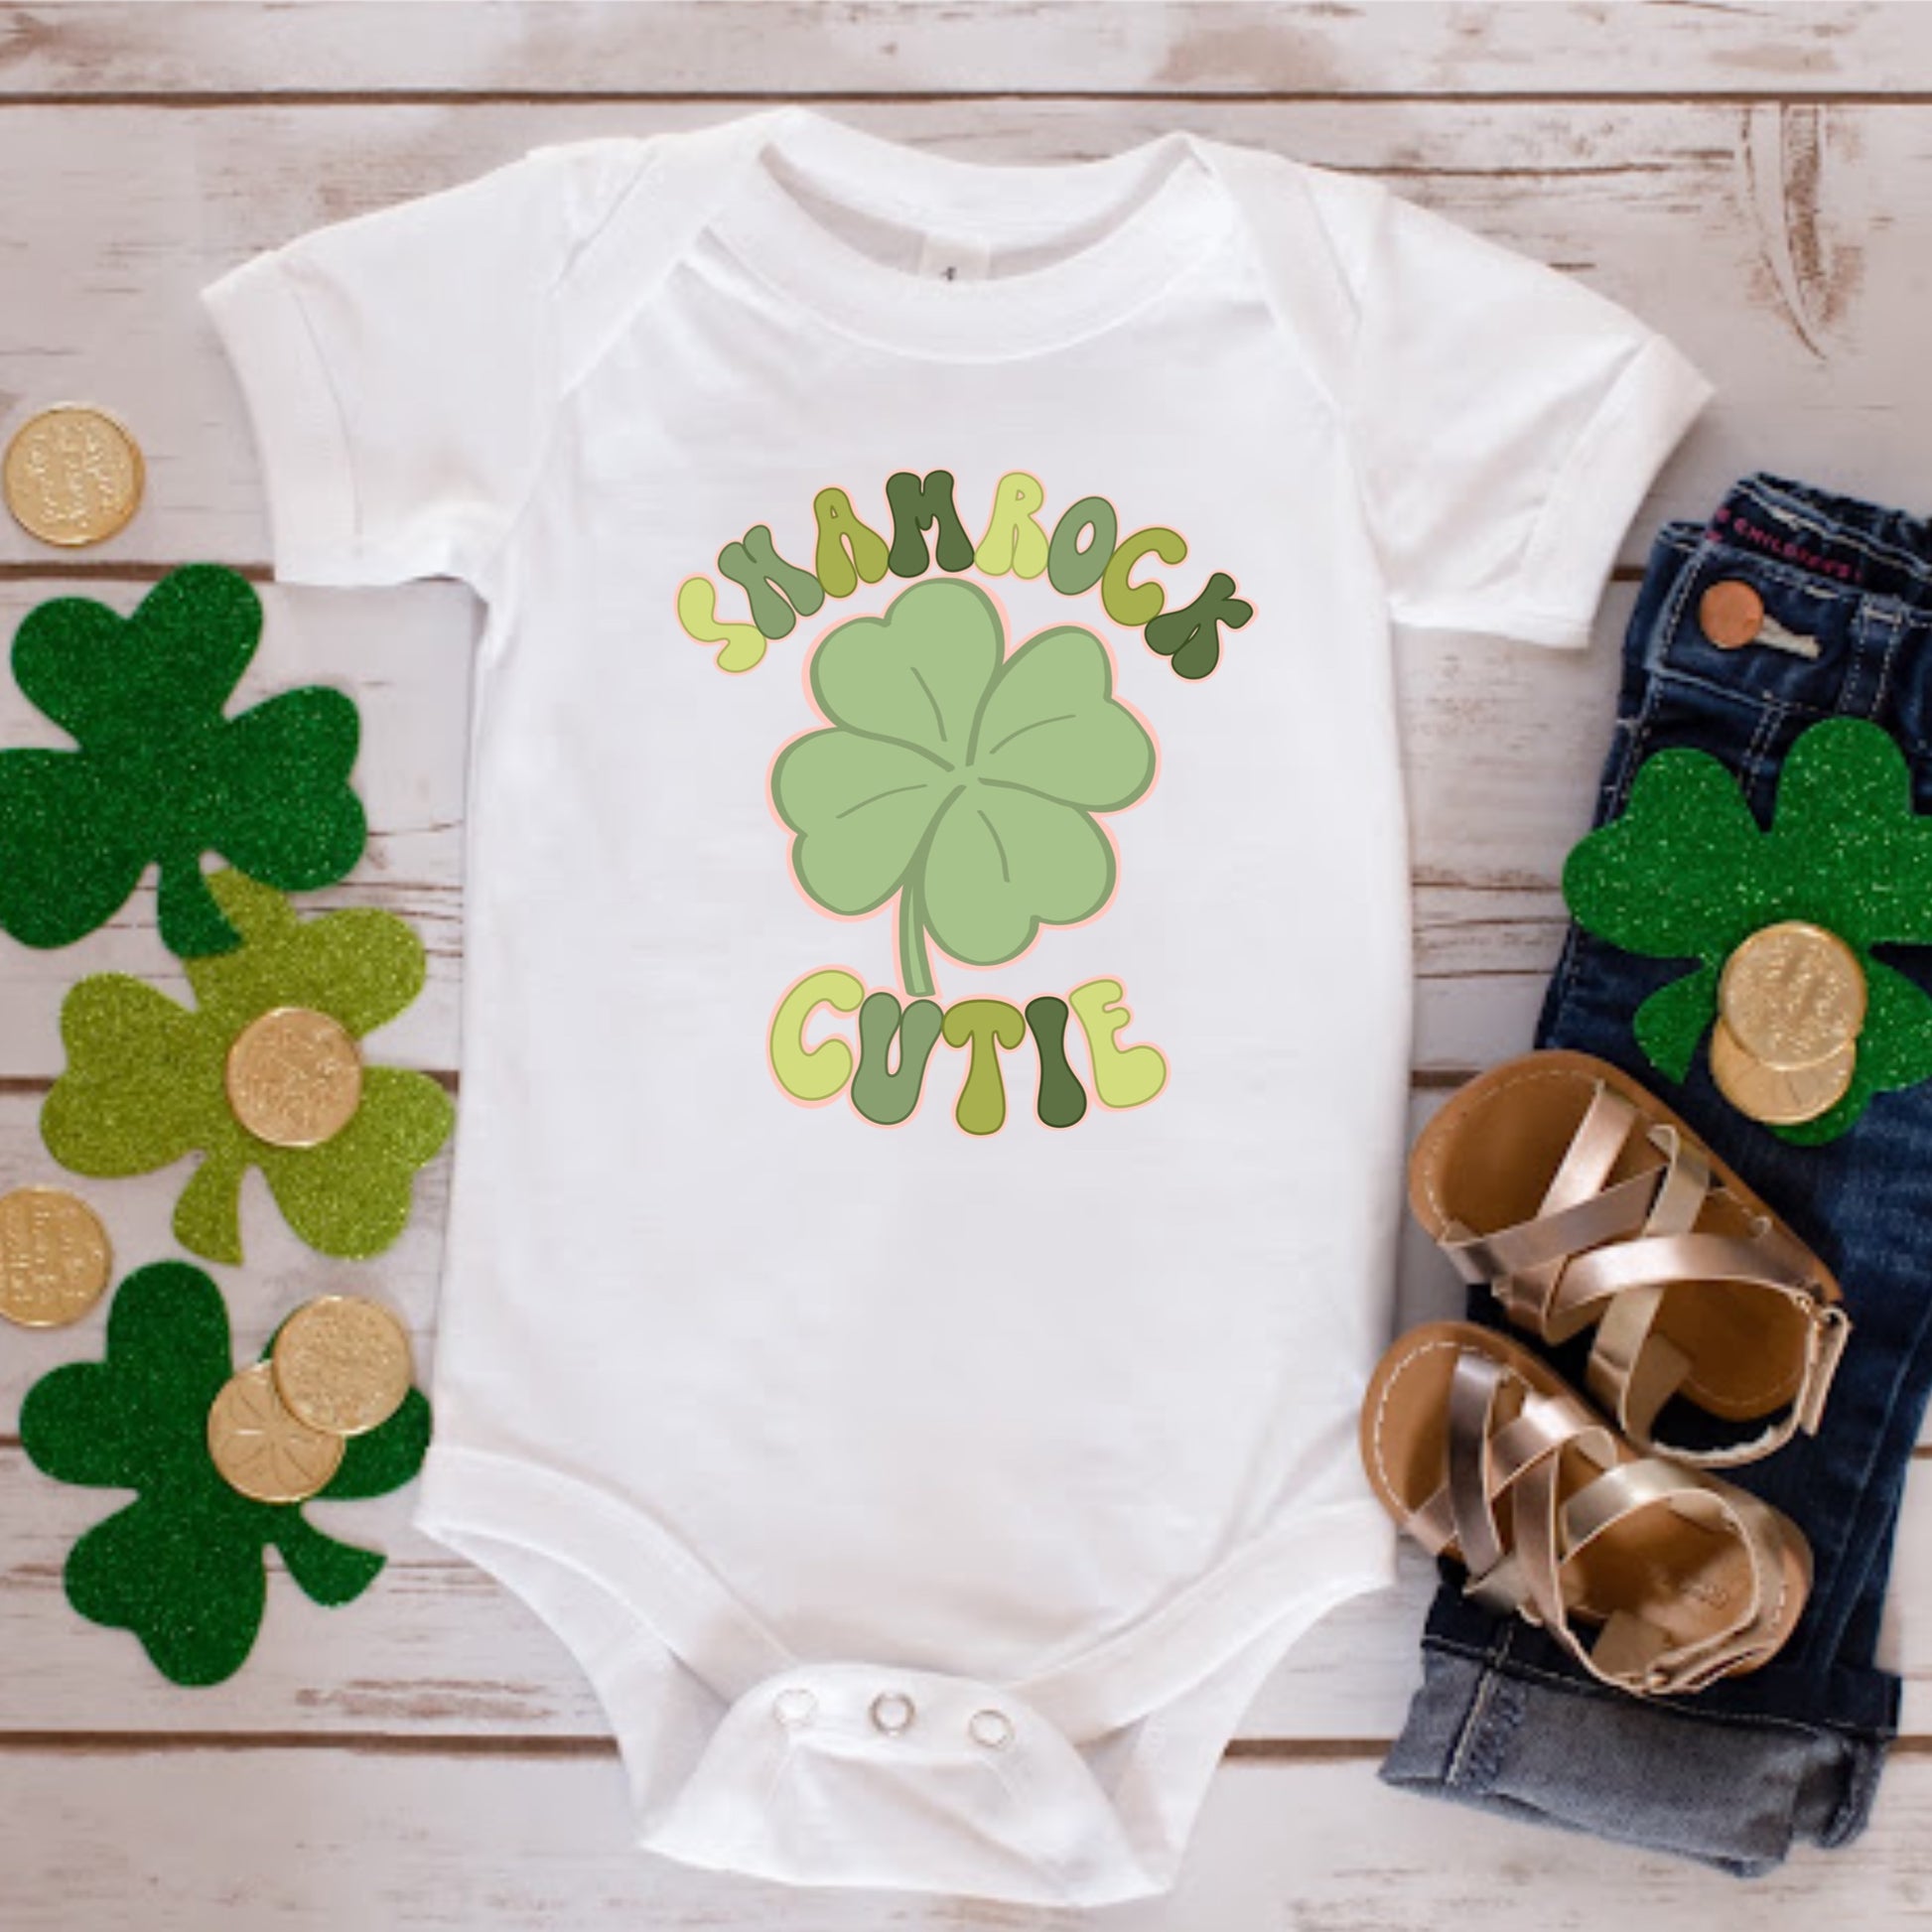 Ready to Press DTF's and Sublimation - St. Patrick's Day